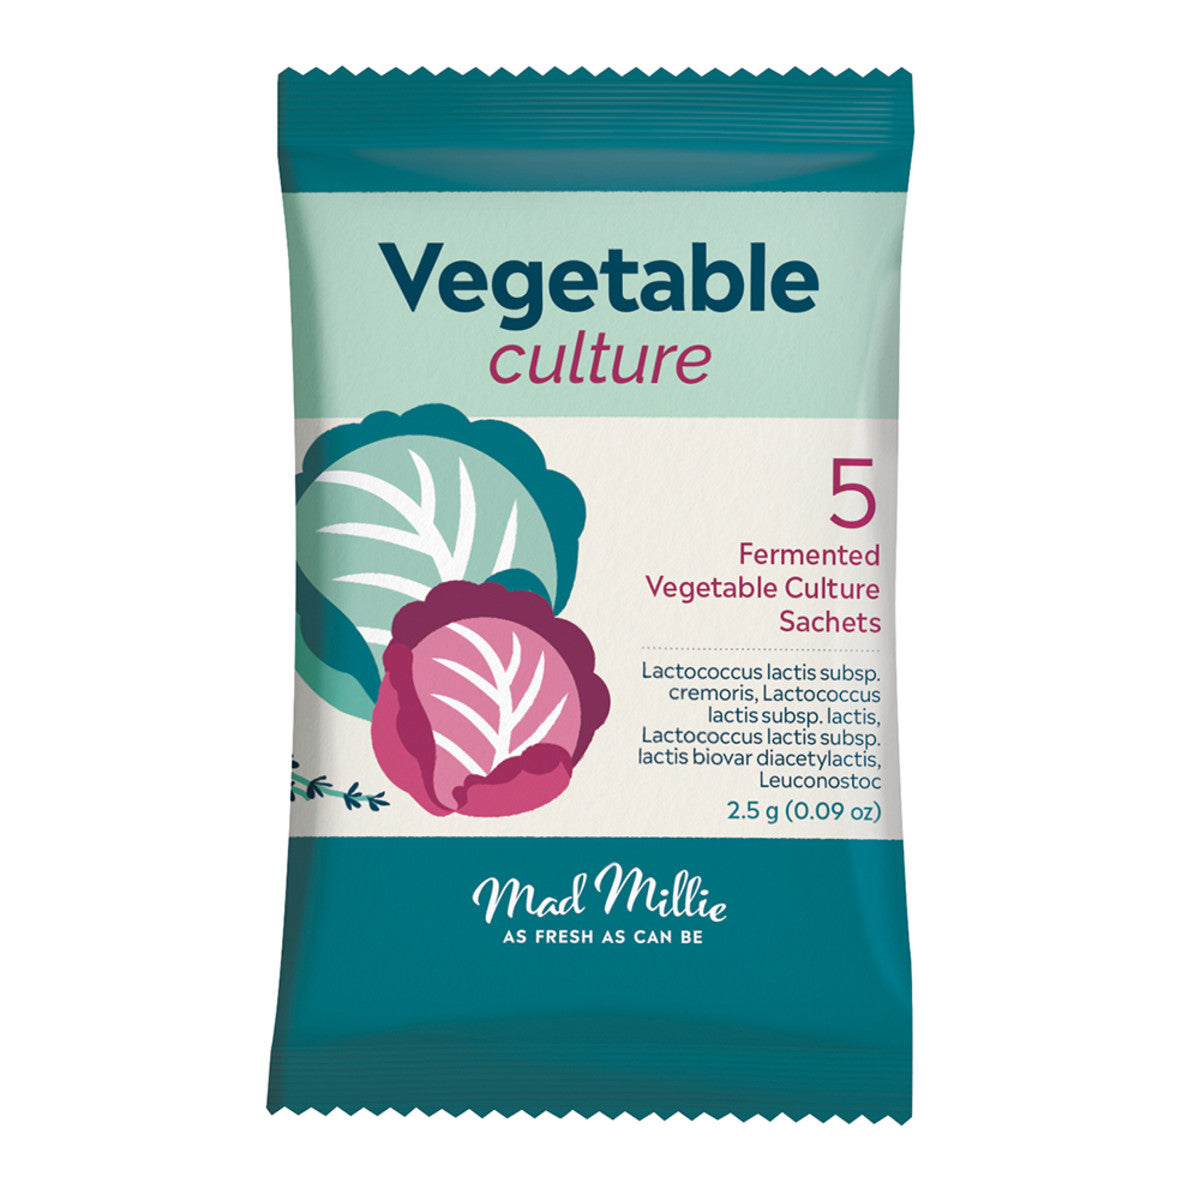 Mad Millie - Vegetable Culture (Fermented) Sachets x 5 Pack